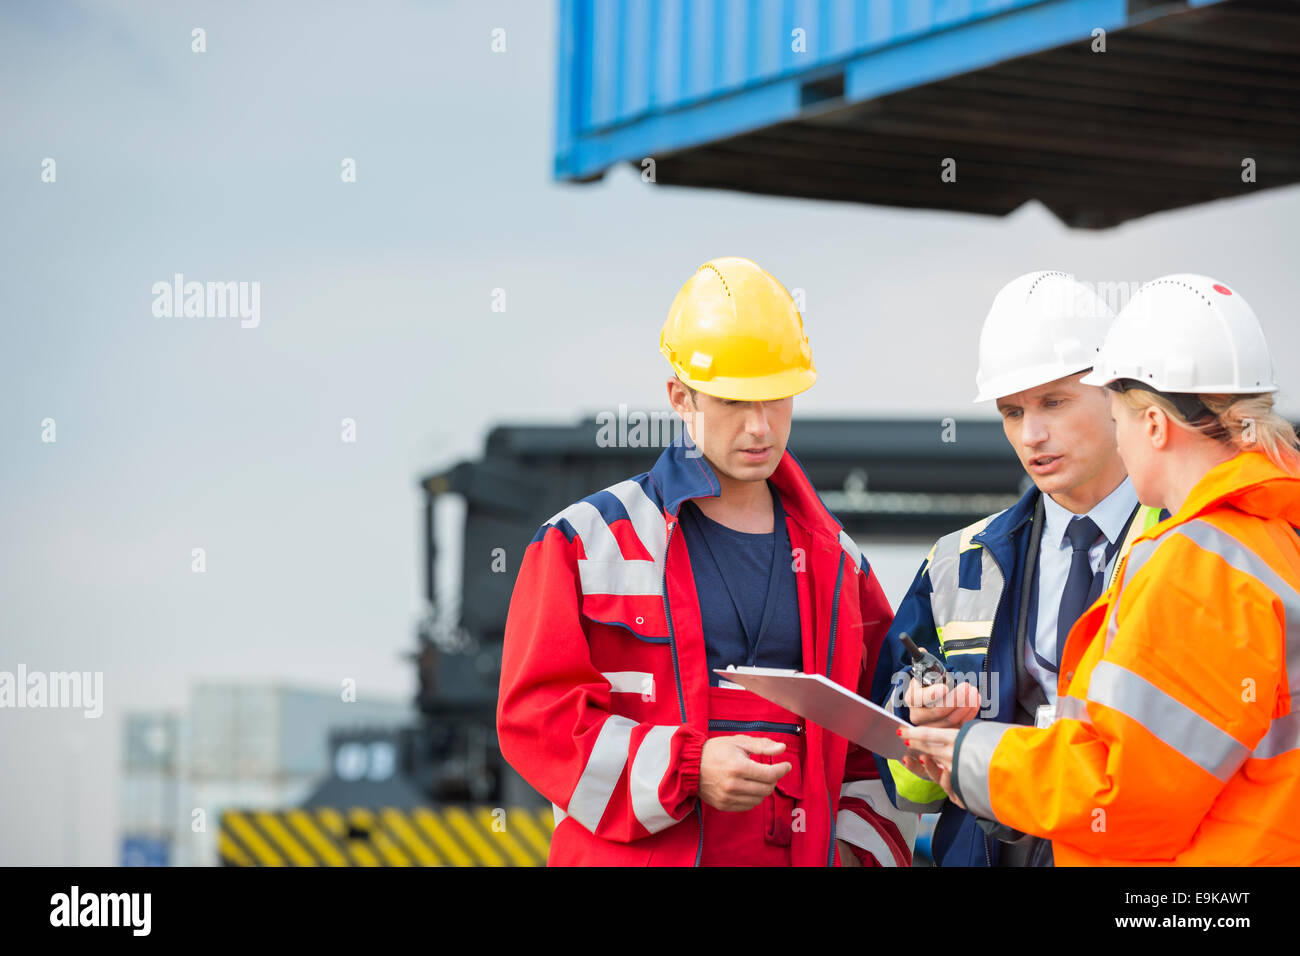 Workers discussing over clipboard in shipping yard Stock Photo